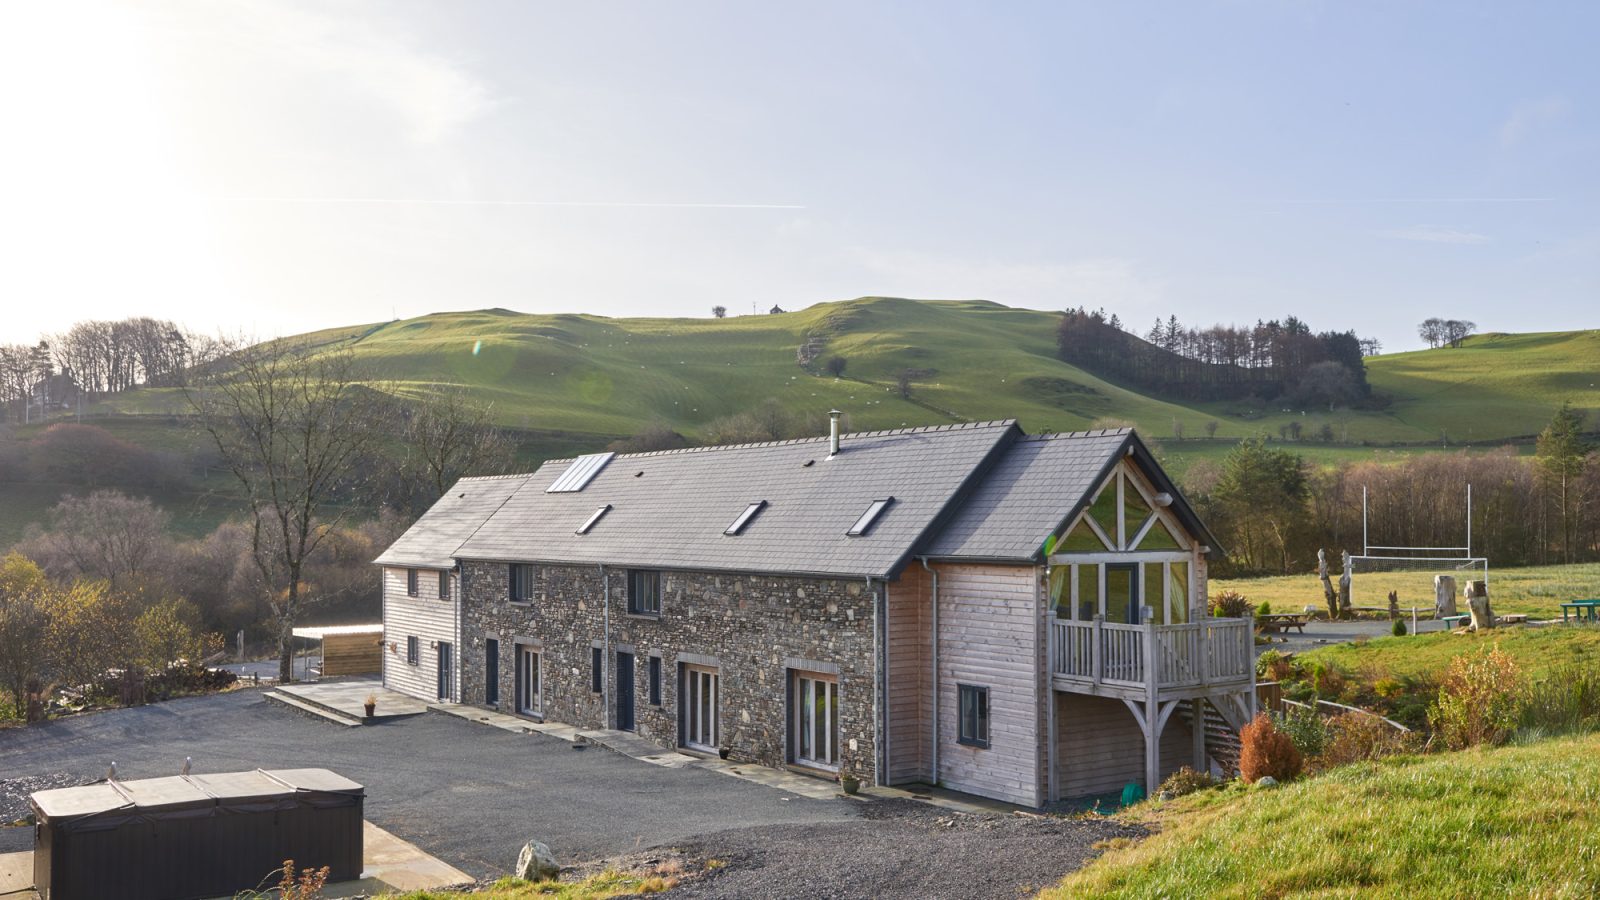  Cambrian Retreat - kate & tom's Large Holiday Homes